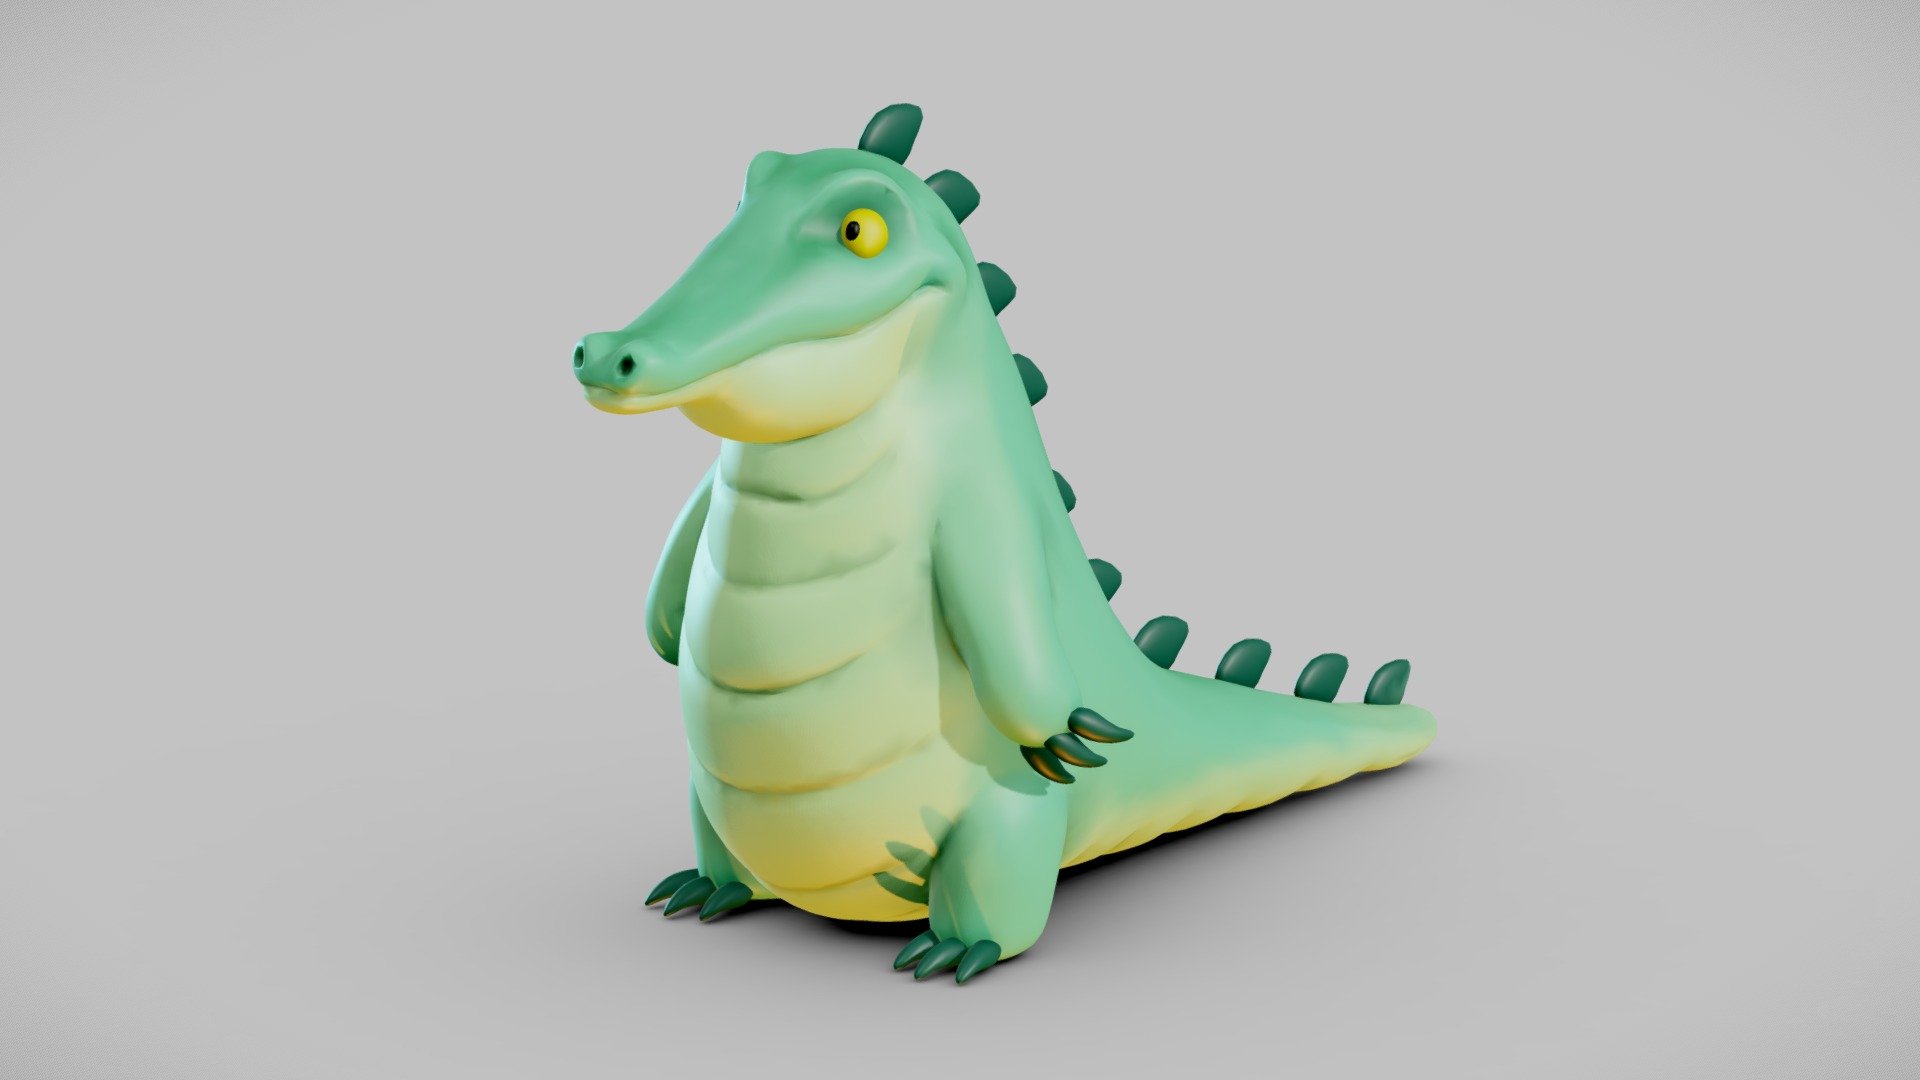 Low Poly Cartoon Crocodile for your renders and games

Material:

Vertex Painted

Files Formats:

Blend

Fbx

Obj - Cartoon Crocodile - Buy Royalty Free 3D model by Vanessa Araújo (@vanessa3d) 3d model